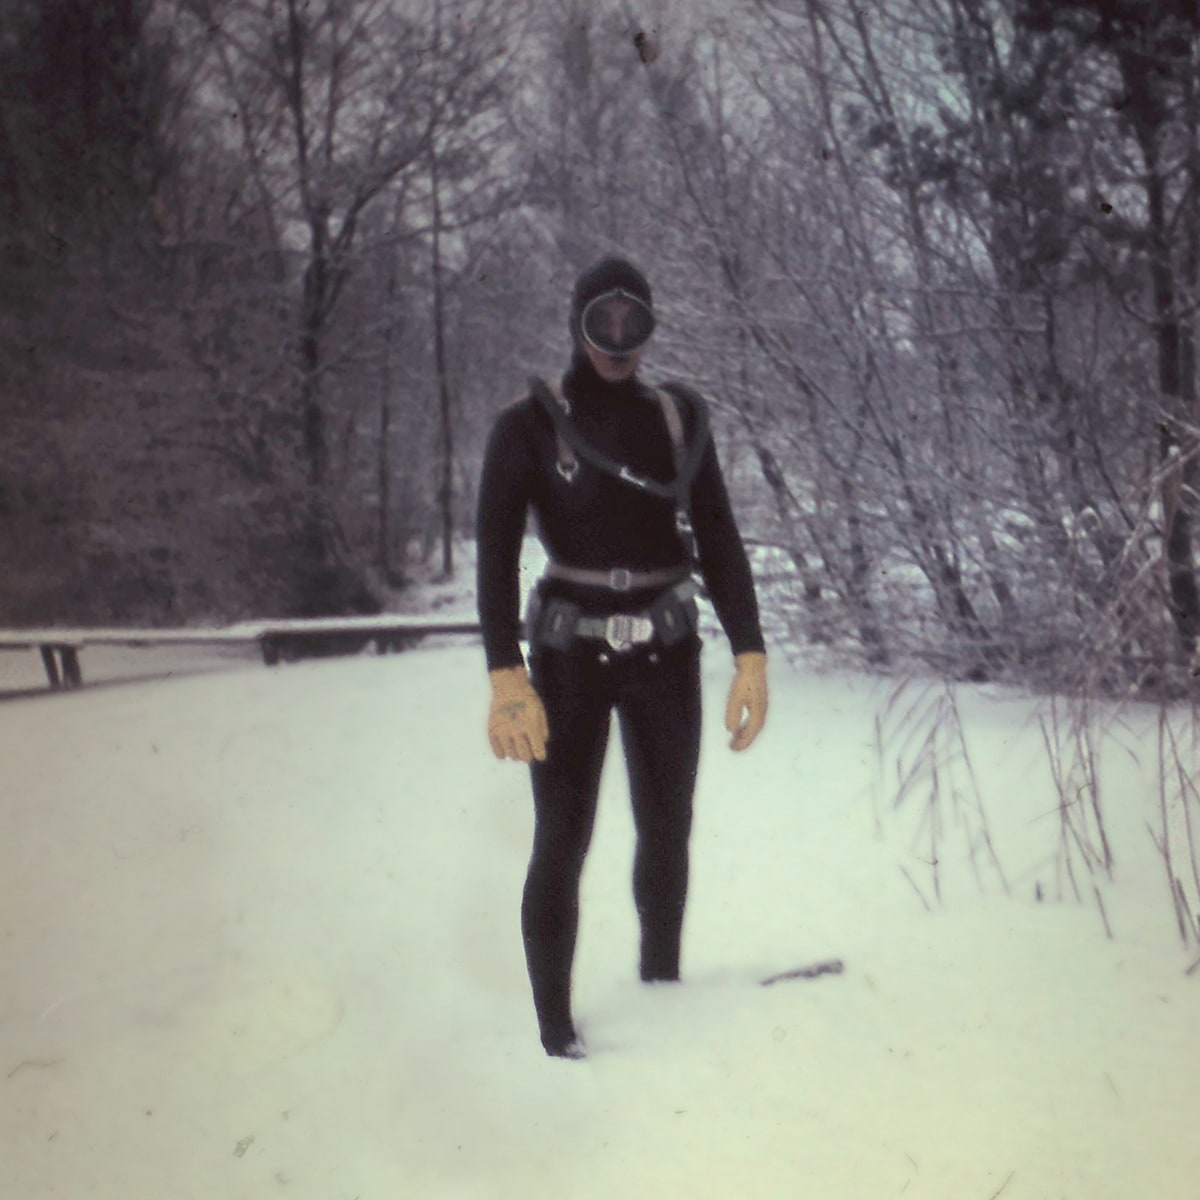 Hubert Hohlbein trained for his escape. Equipped with a diving suit and weight belt, he swam across Jungfernsee to West Berlins - Photo: Privatbesitz, Jürgen Fuß